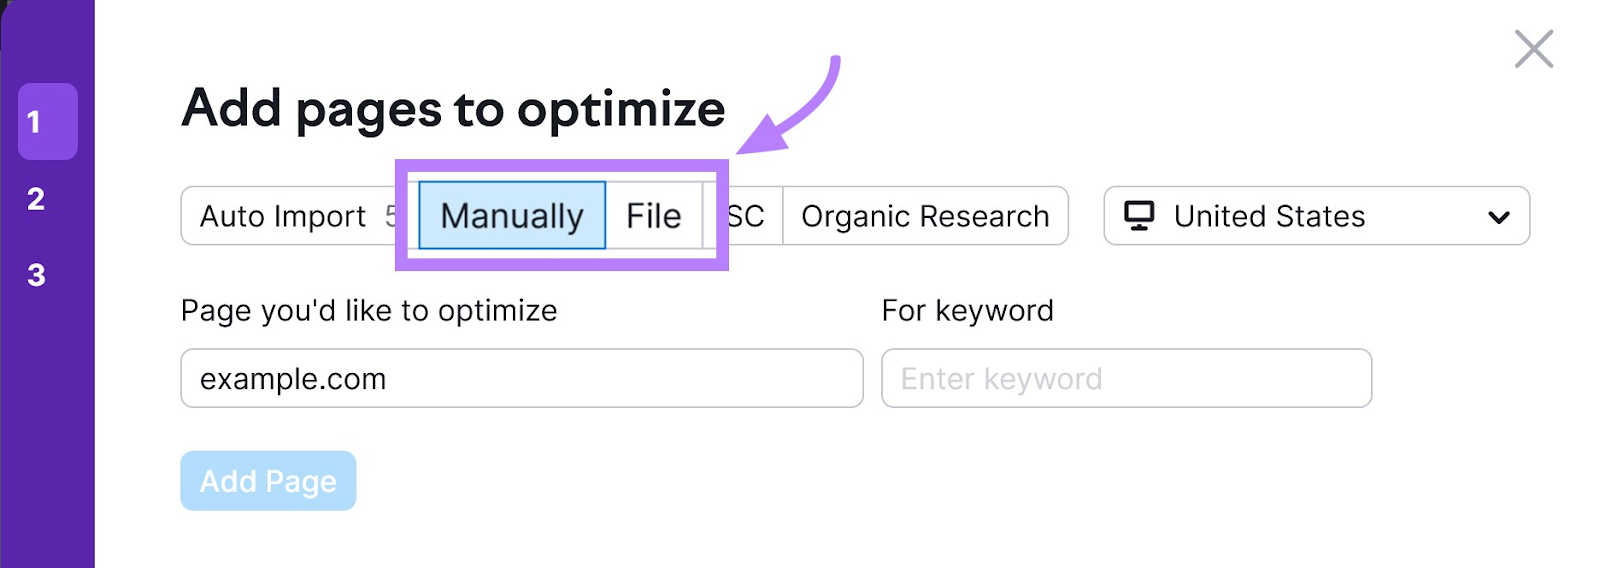 "Add pages to optimize" page with "Manually” or “File” options highlighted with a purple box and arrow.